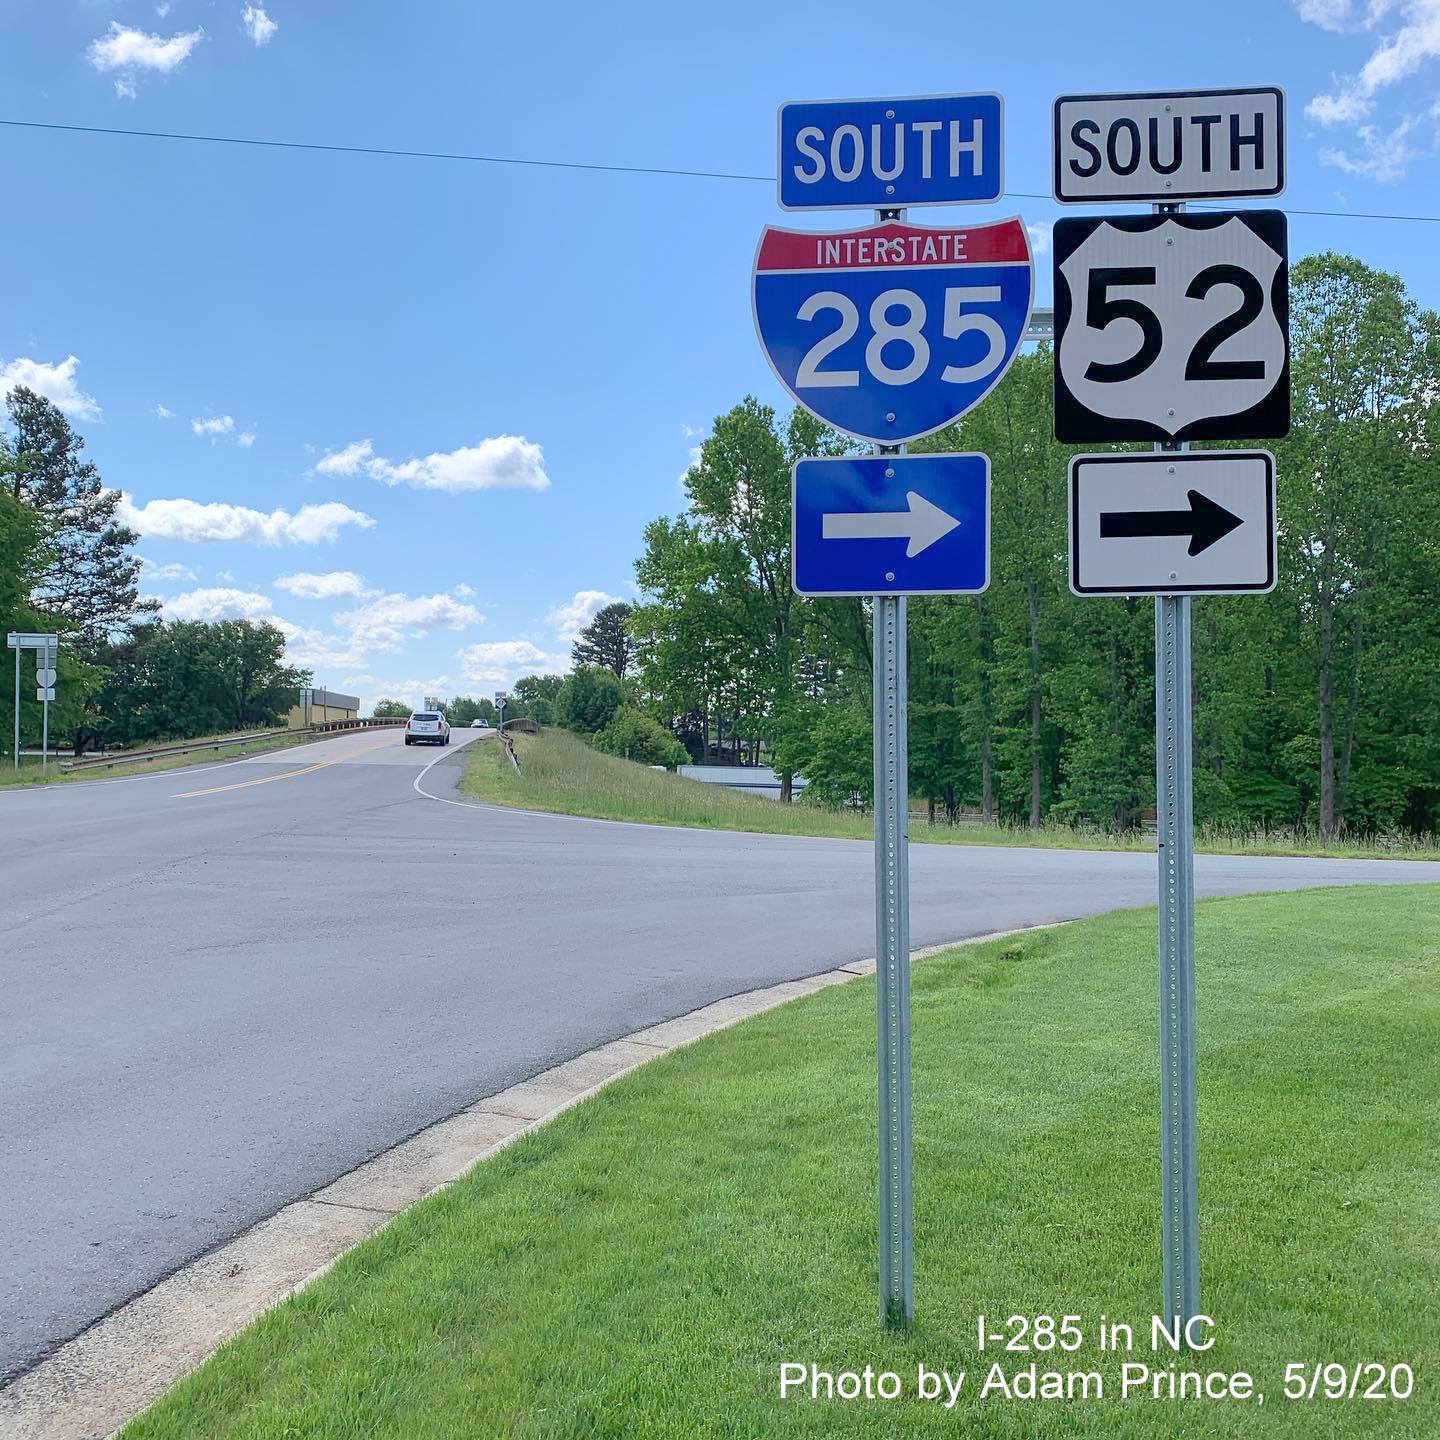 Image of new I-285 ramp signage north of Lexington, by Adam Prince on May 9, 2020